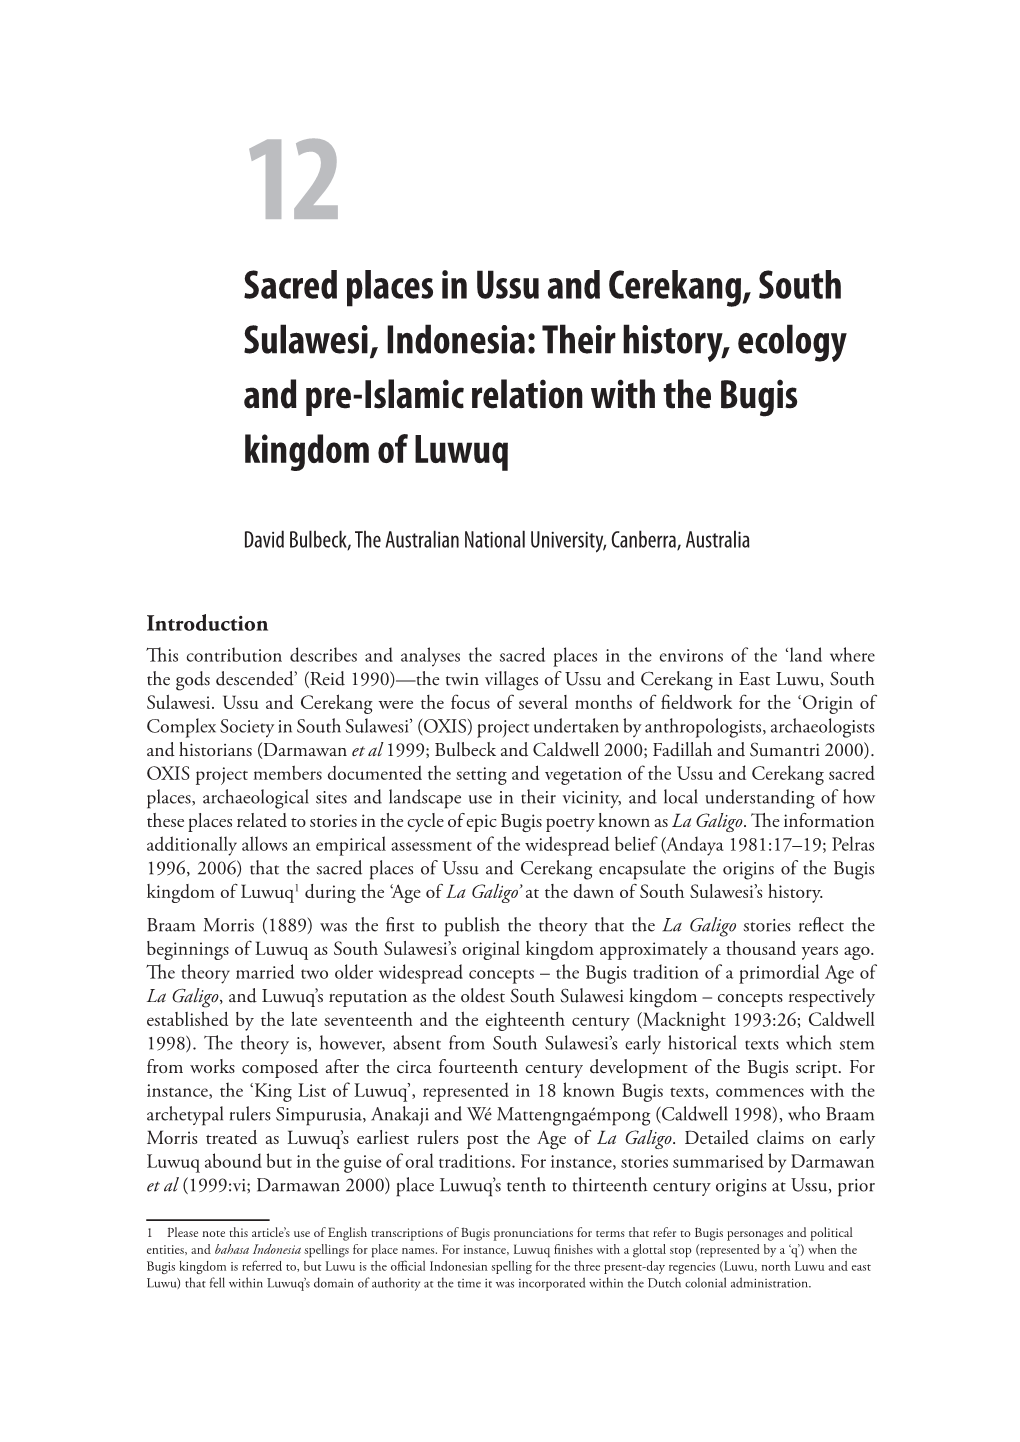 Sacred Places in Ussu and Cerekang, South Sulawesi, Indonesia: Their History, Ecology and Pre-Islamic Relation with the Bugis Kingdom of Luwuq